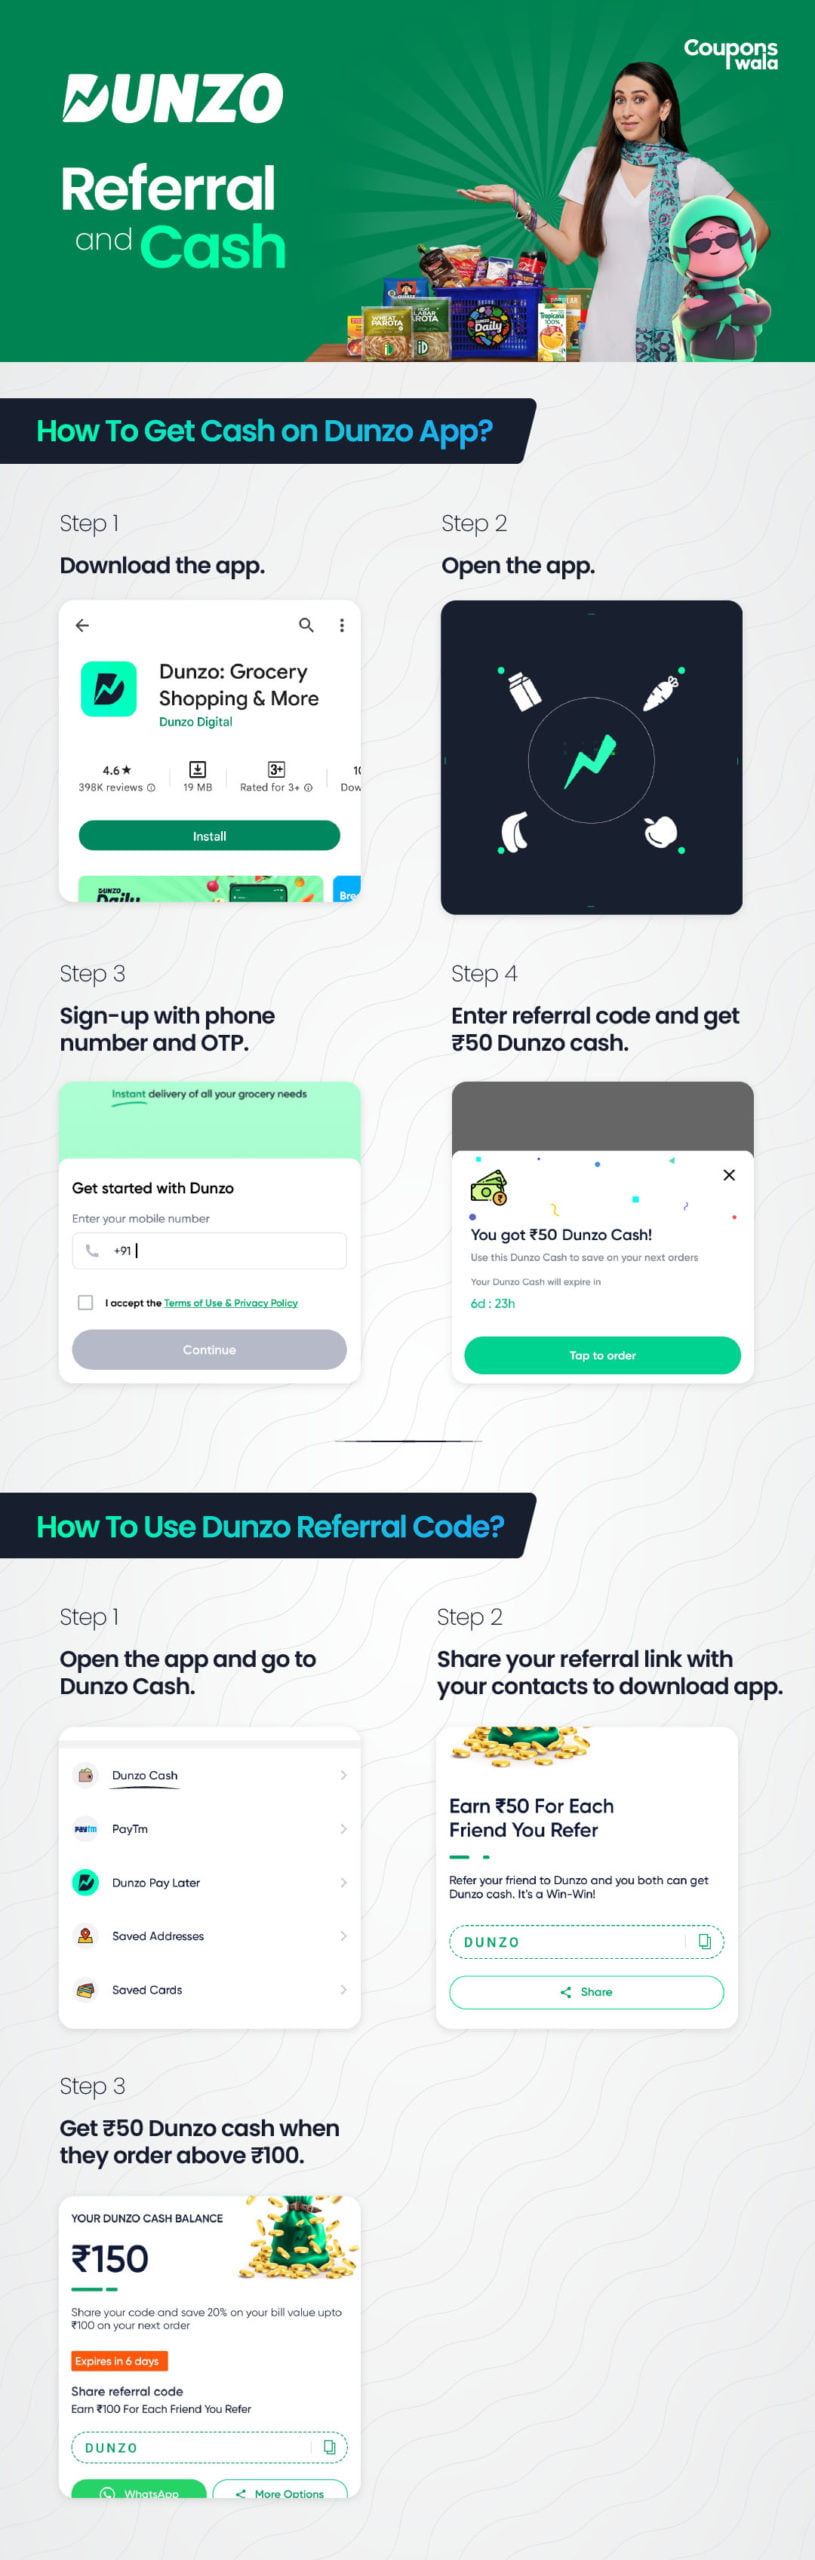 How To Get Cash on Dunzo App